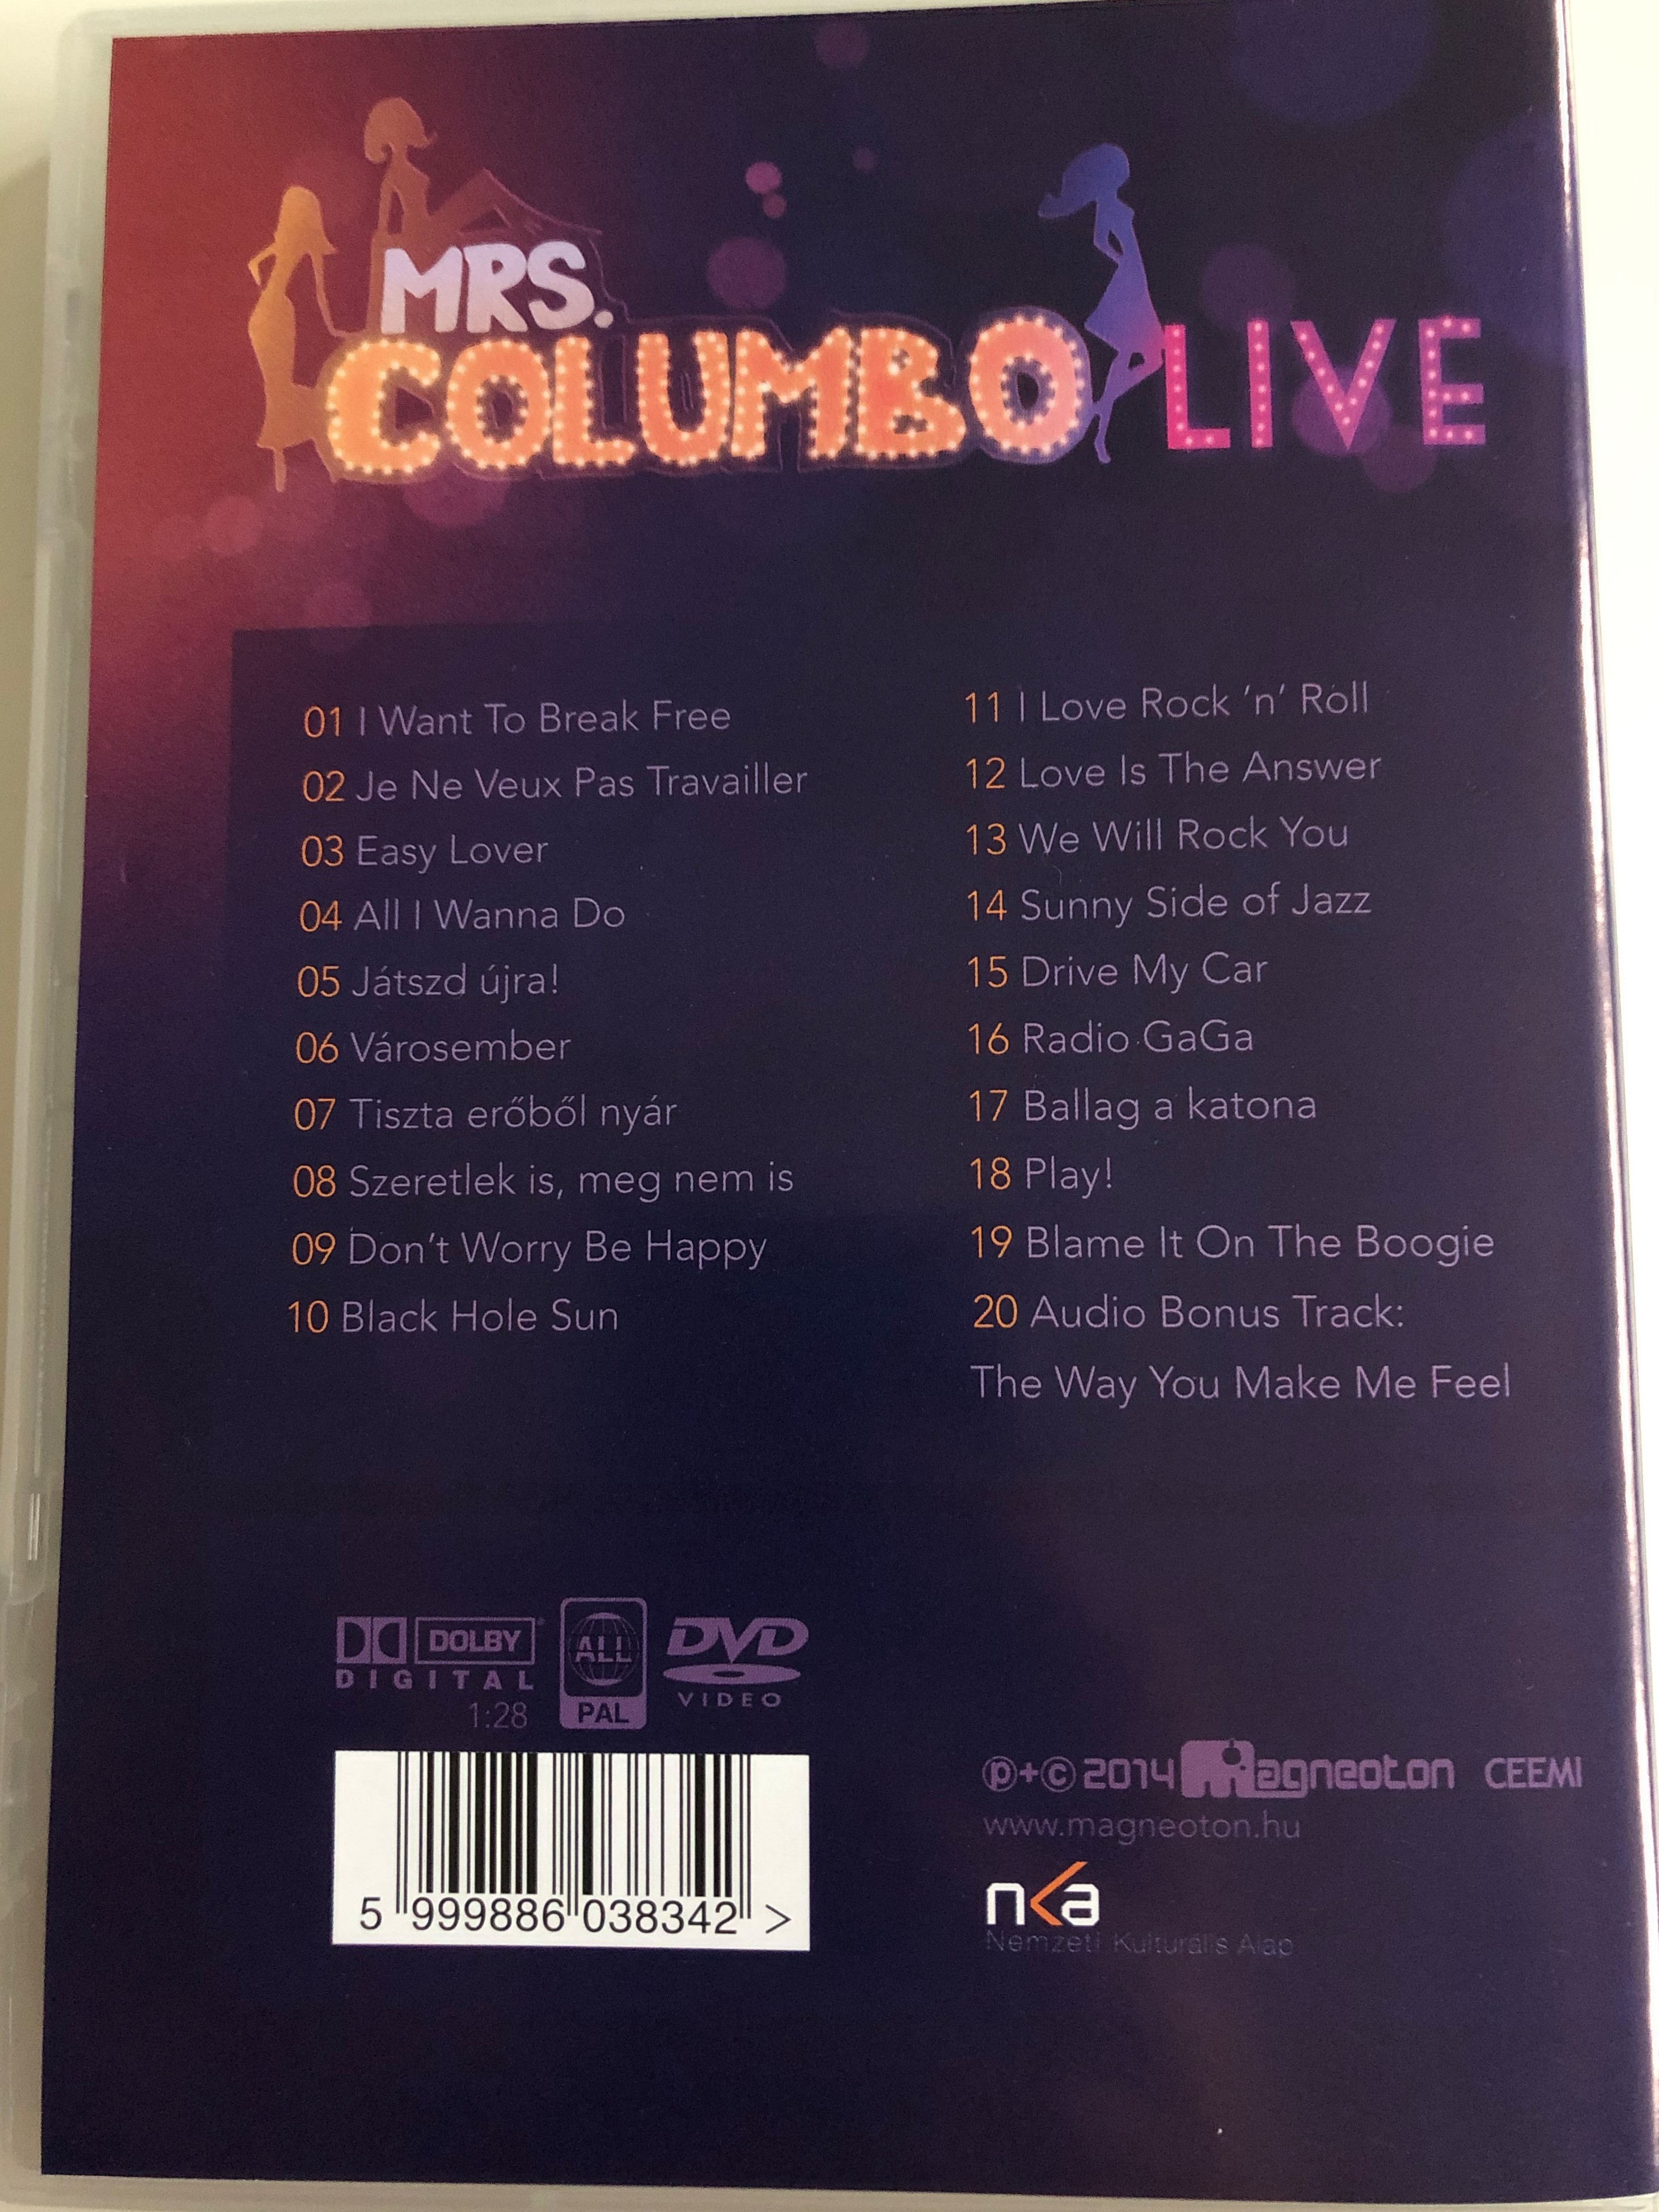 mrs.-columbo-live-dvd-2014-magneoton-don-t-worry-be-happy-love-is-the-answer-we-will-rock-you-sunny-side-of-jazz-2-.jpg